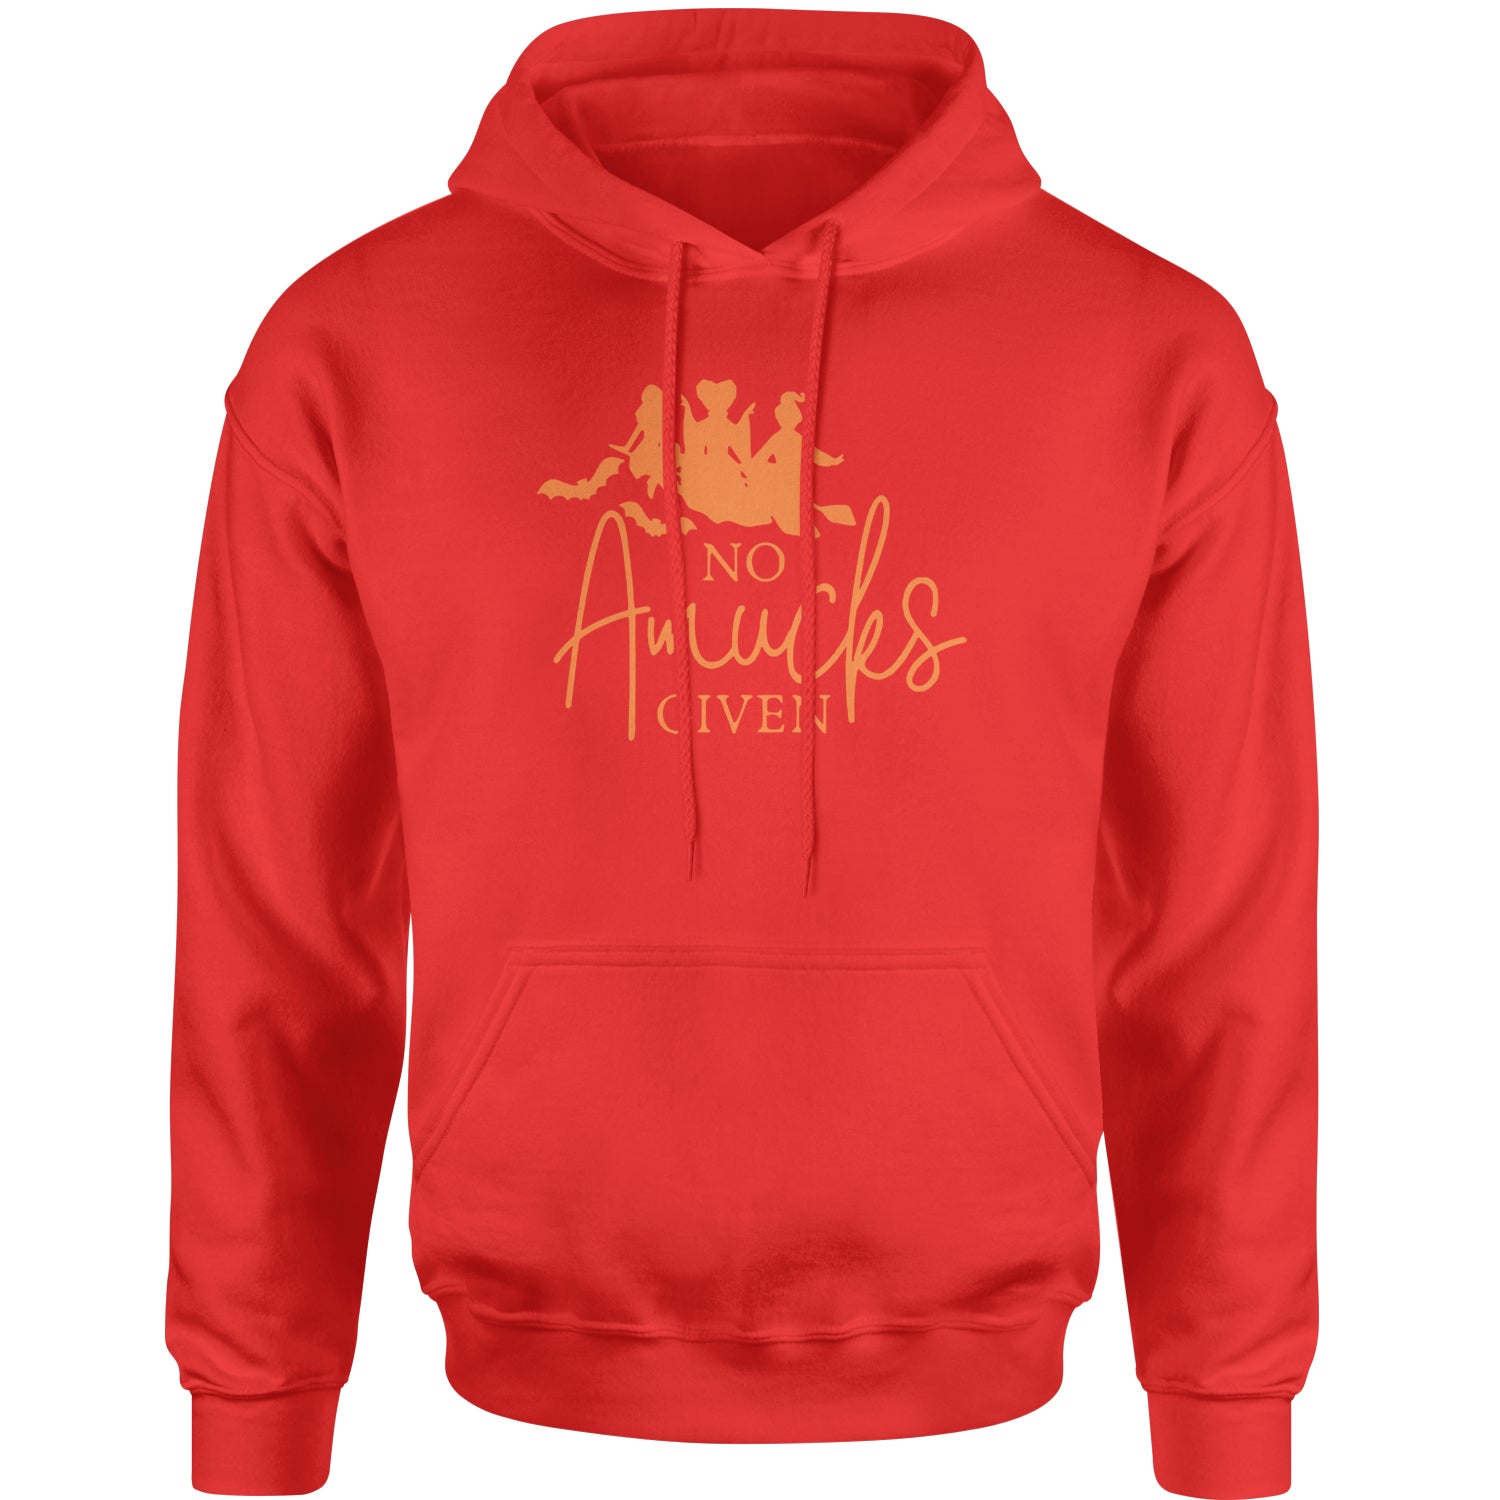 No Amucks Given Hocus Pocus Adult Hoodie Sweatshirt descendants, enchanted, eve, hallows, hocus, or, pocus, sanderson, sisters, treat, trick, witches by Expression Tees